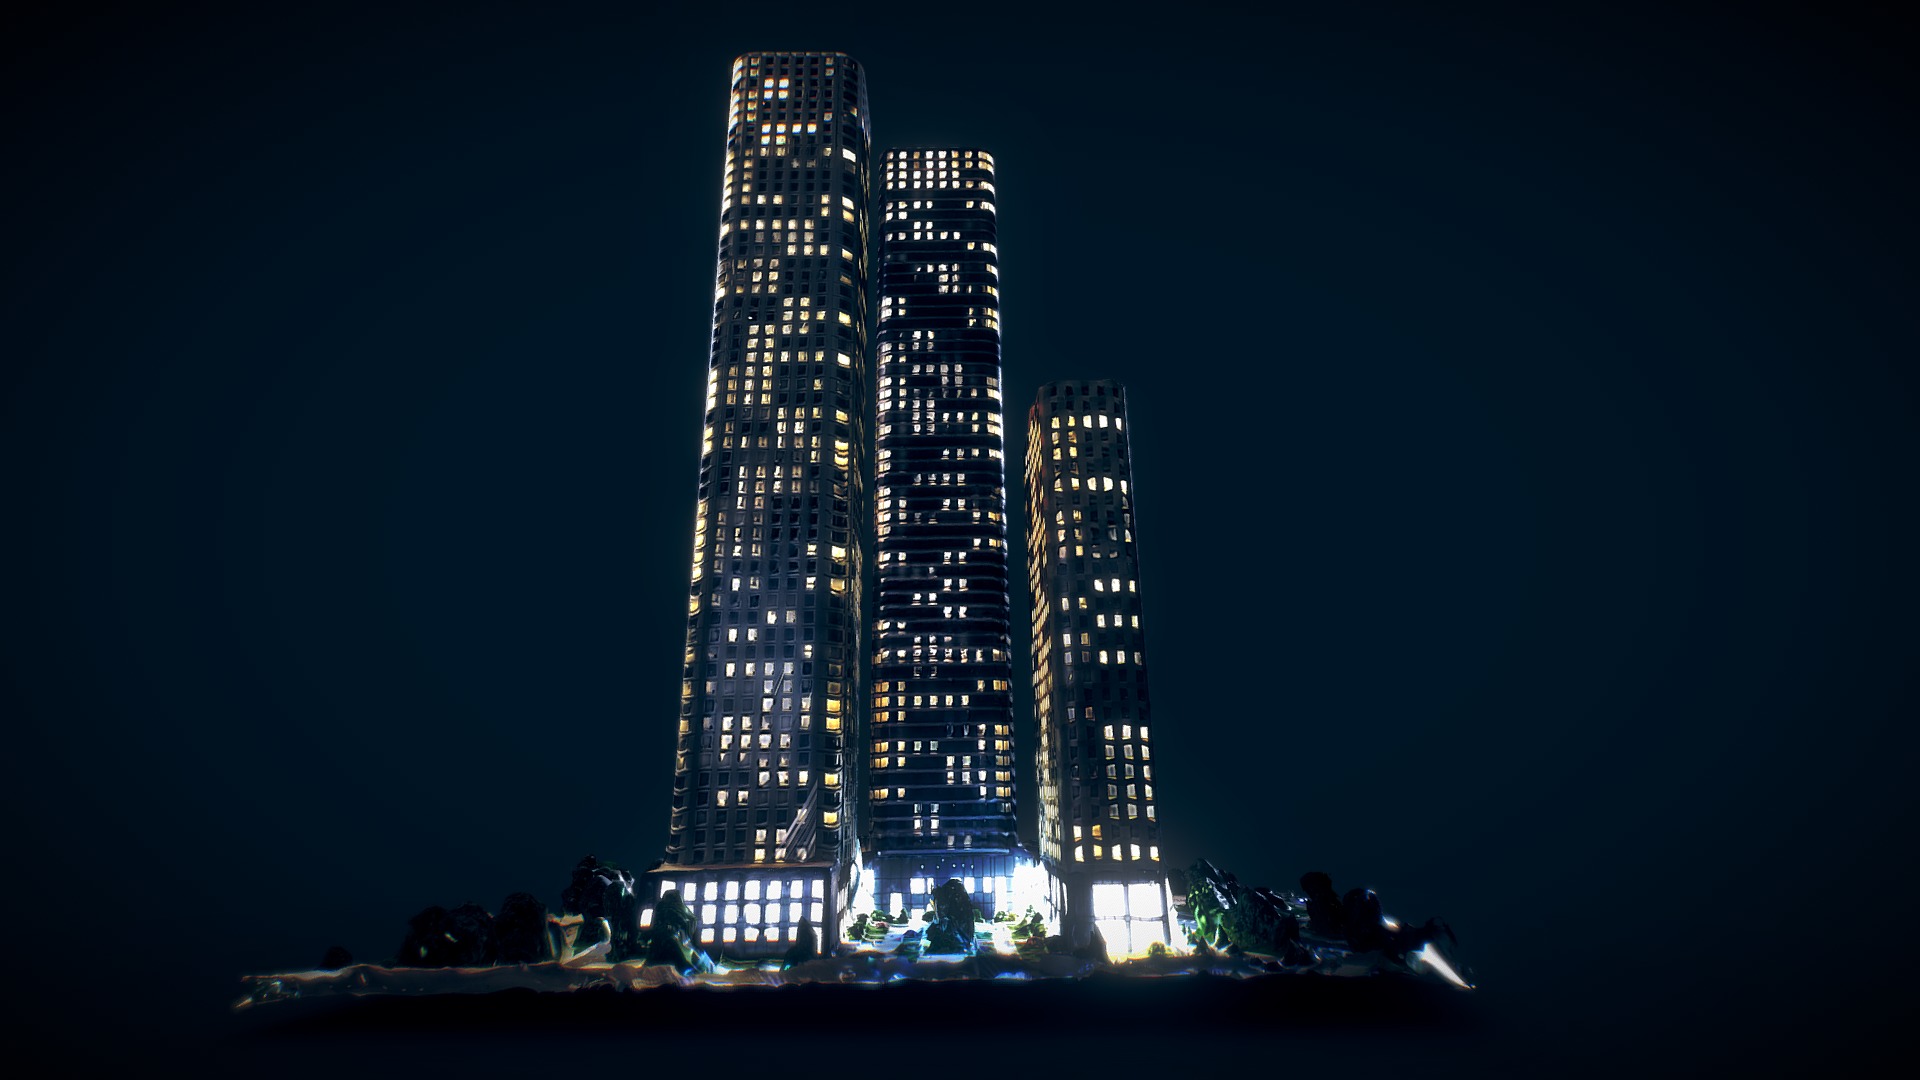 3D model D1 - This is a 3D model of the D1. The 3D model is about two tall buildings with lights on at night.